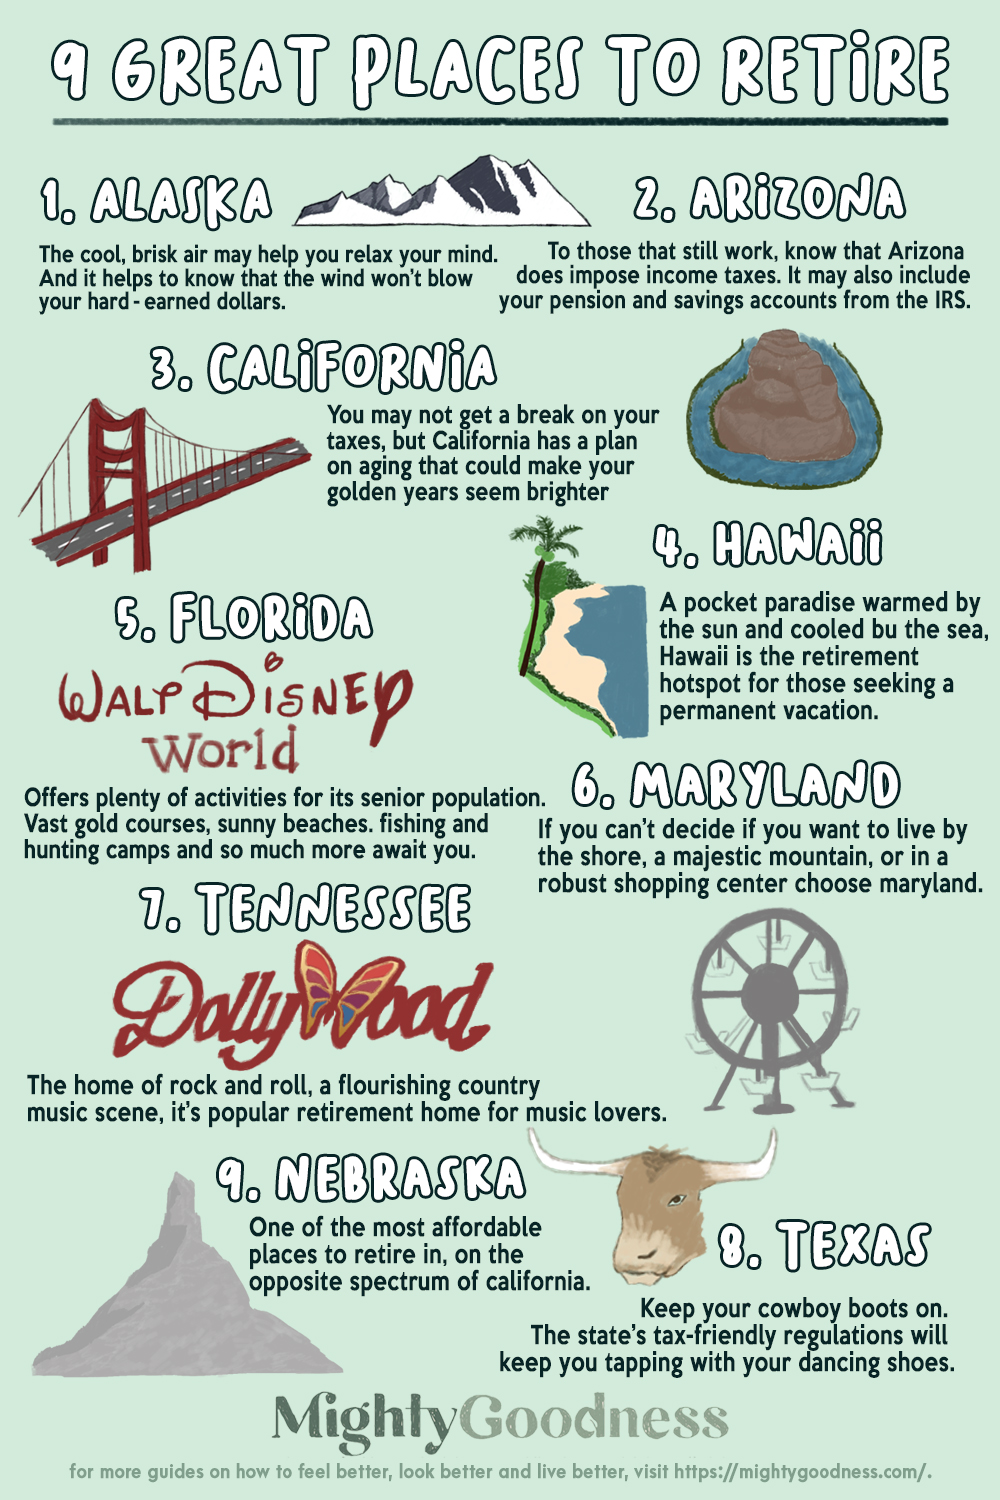 9 great places to retire_infographics_revised